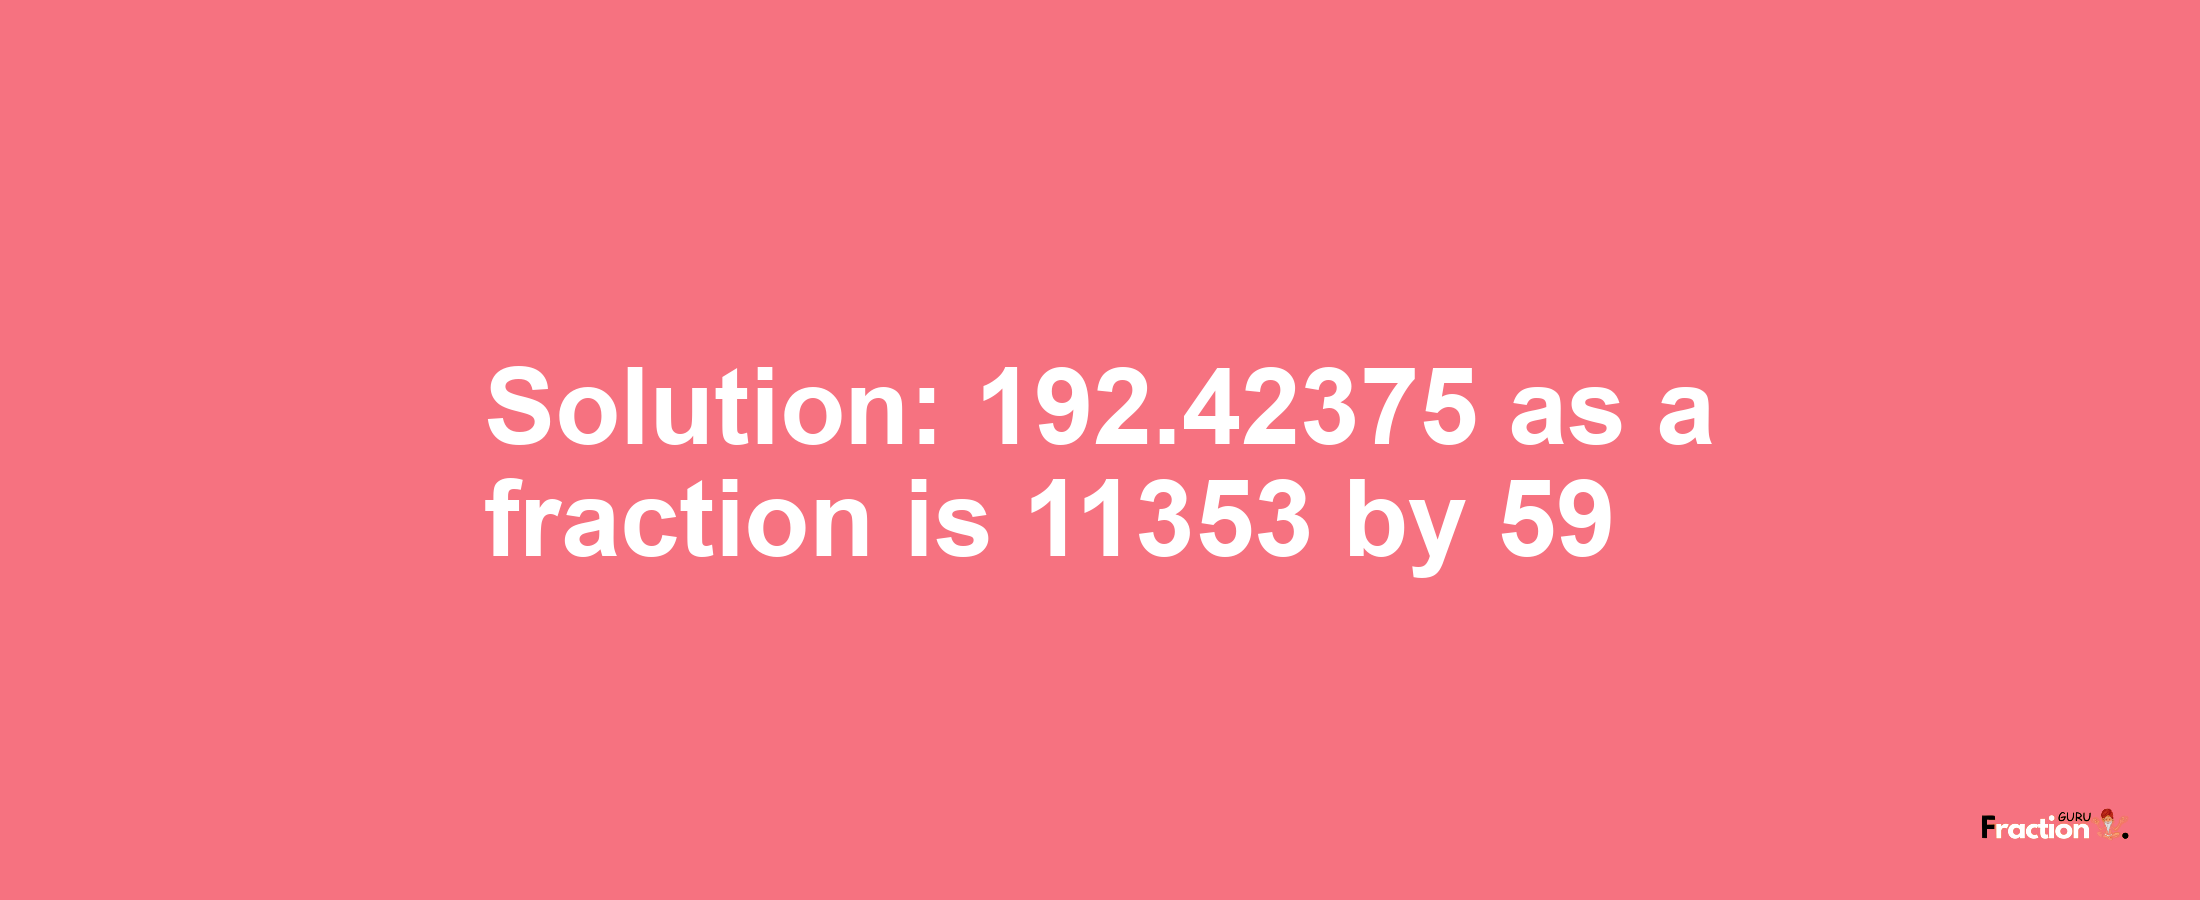 Solution:192.42375 as a fraction is 11353/59